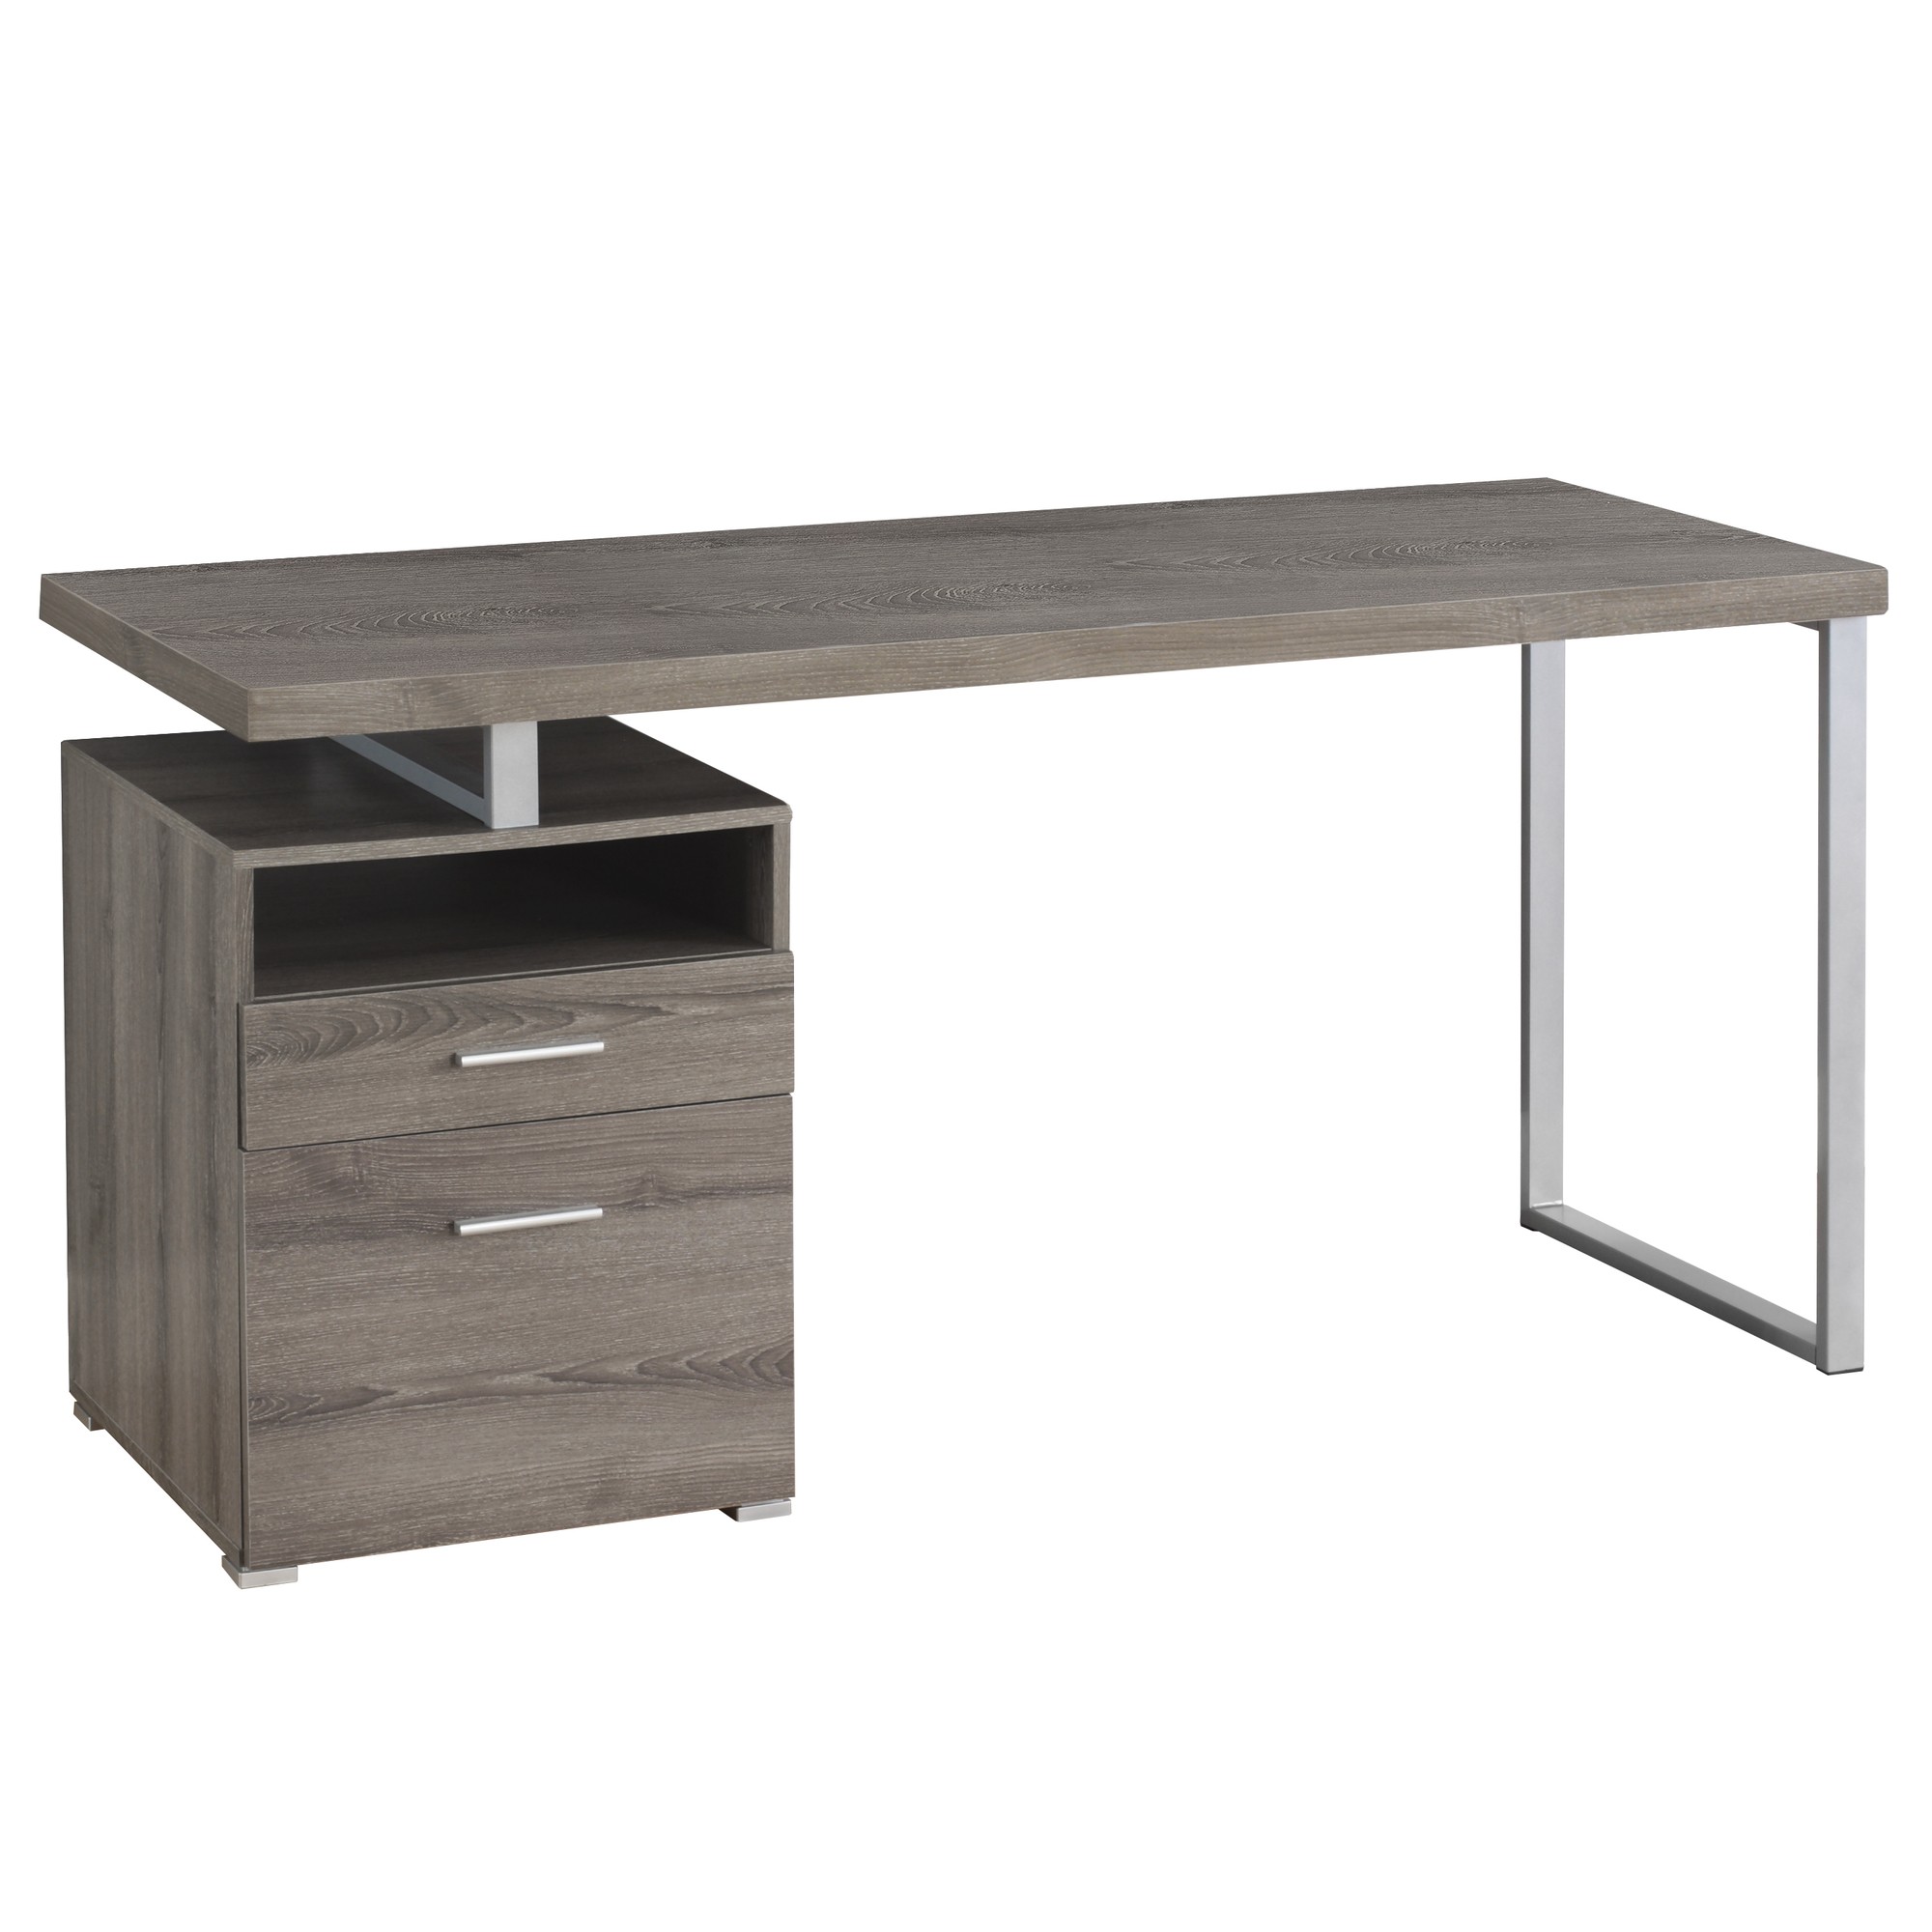 60" Computer Desk, Silver Metal Legs and Dark Taupe Top